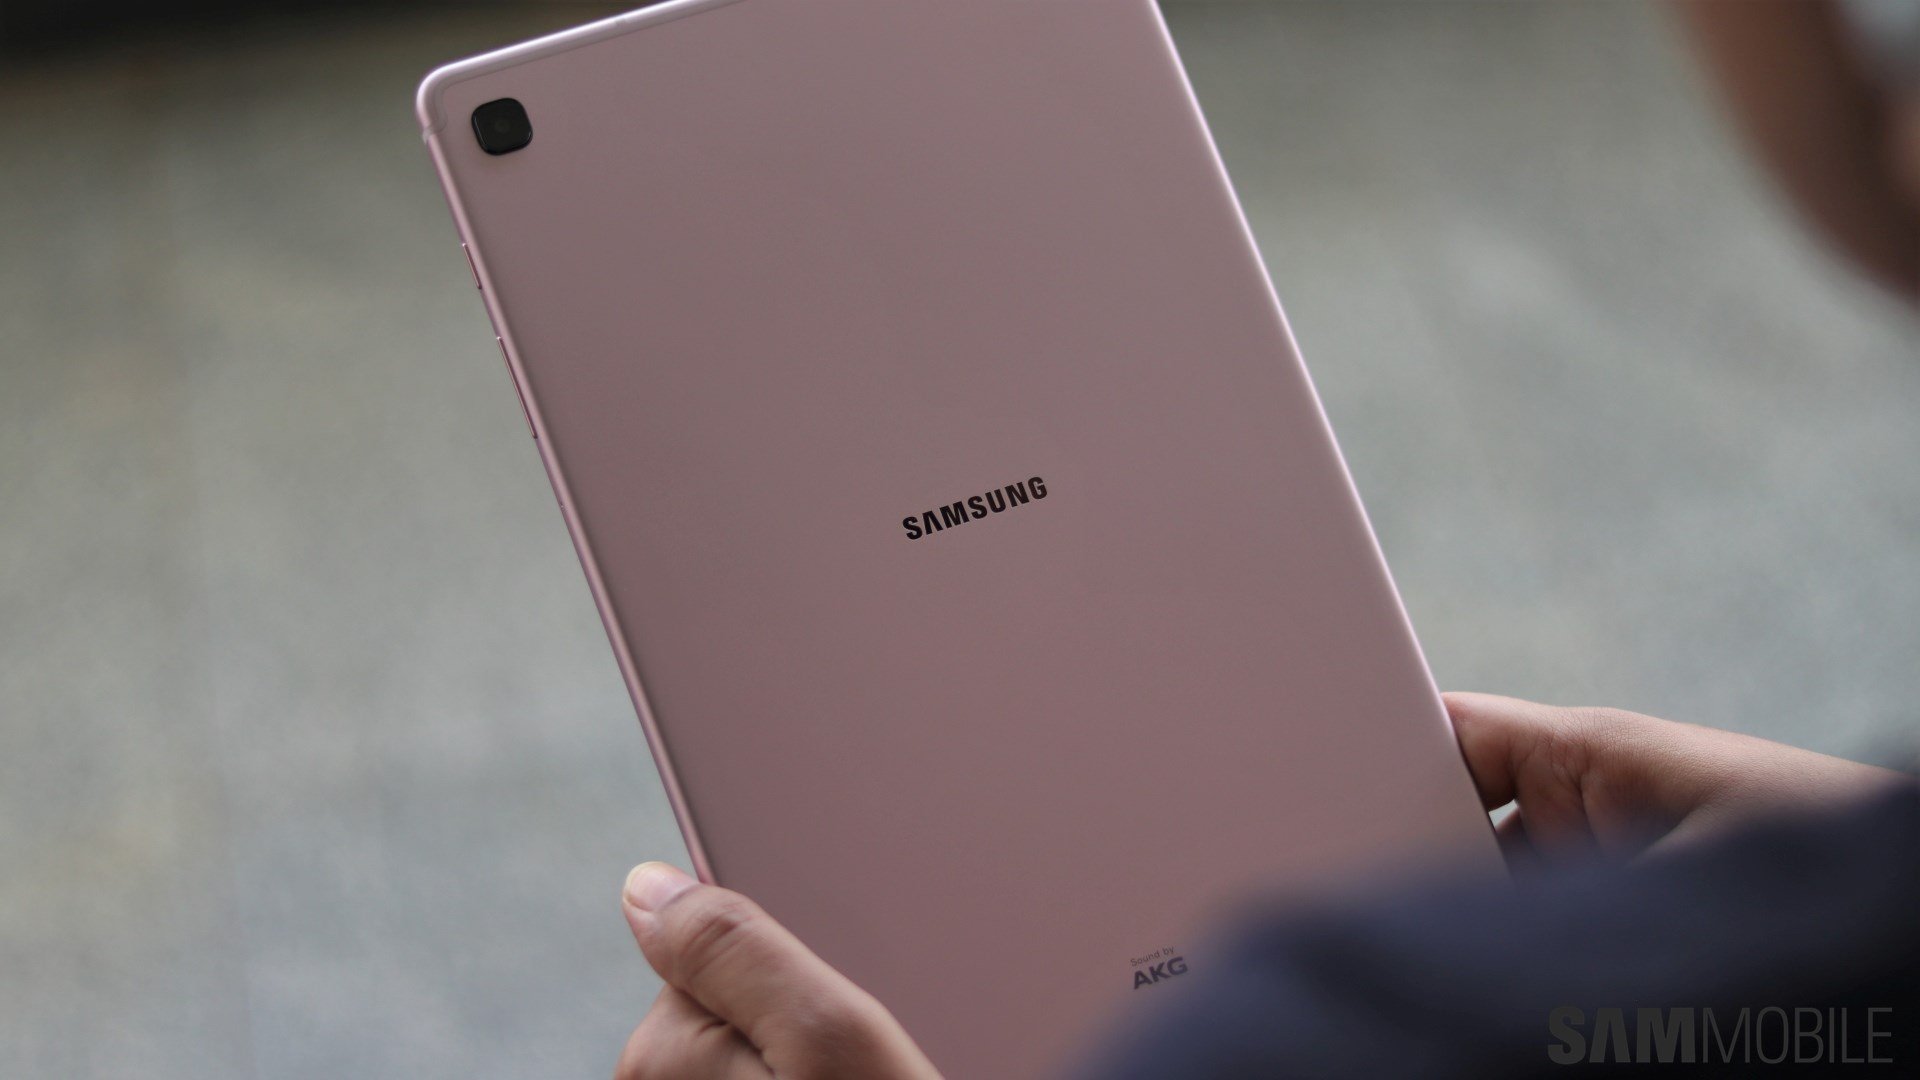 Samsung Galaxy Tab S6 Lite review: You should just buy an iPad